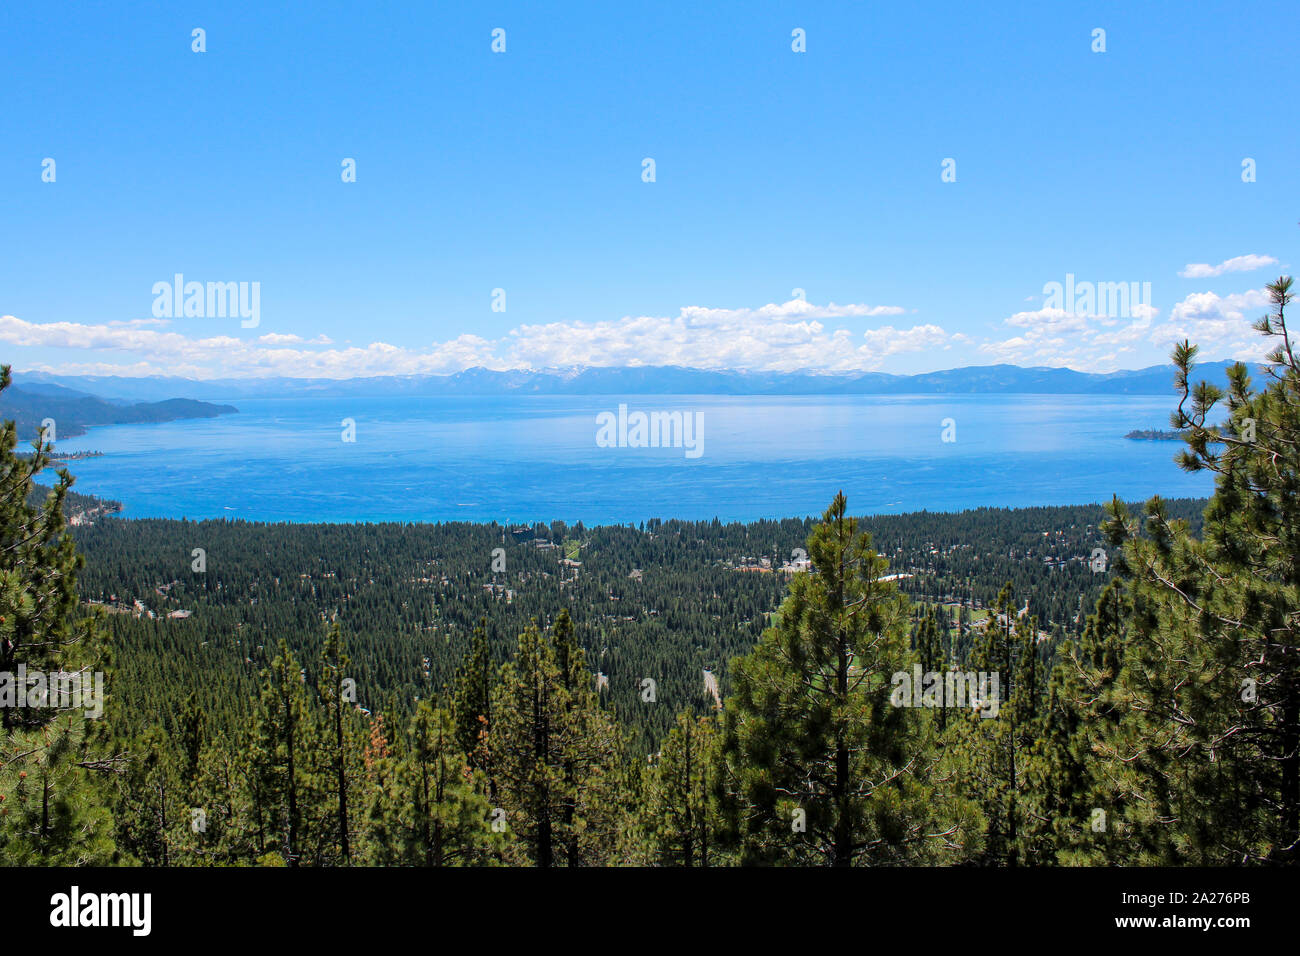 Landscape view of the Lake Tahoe from one of the viewpoint in California - Nevada state border Stock Photo